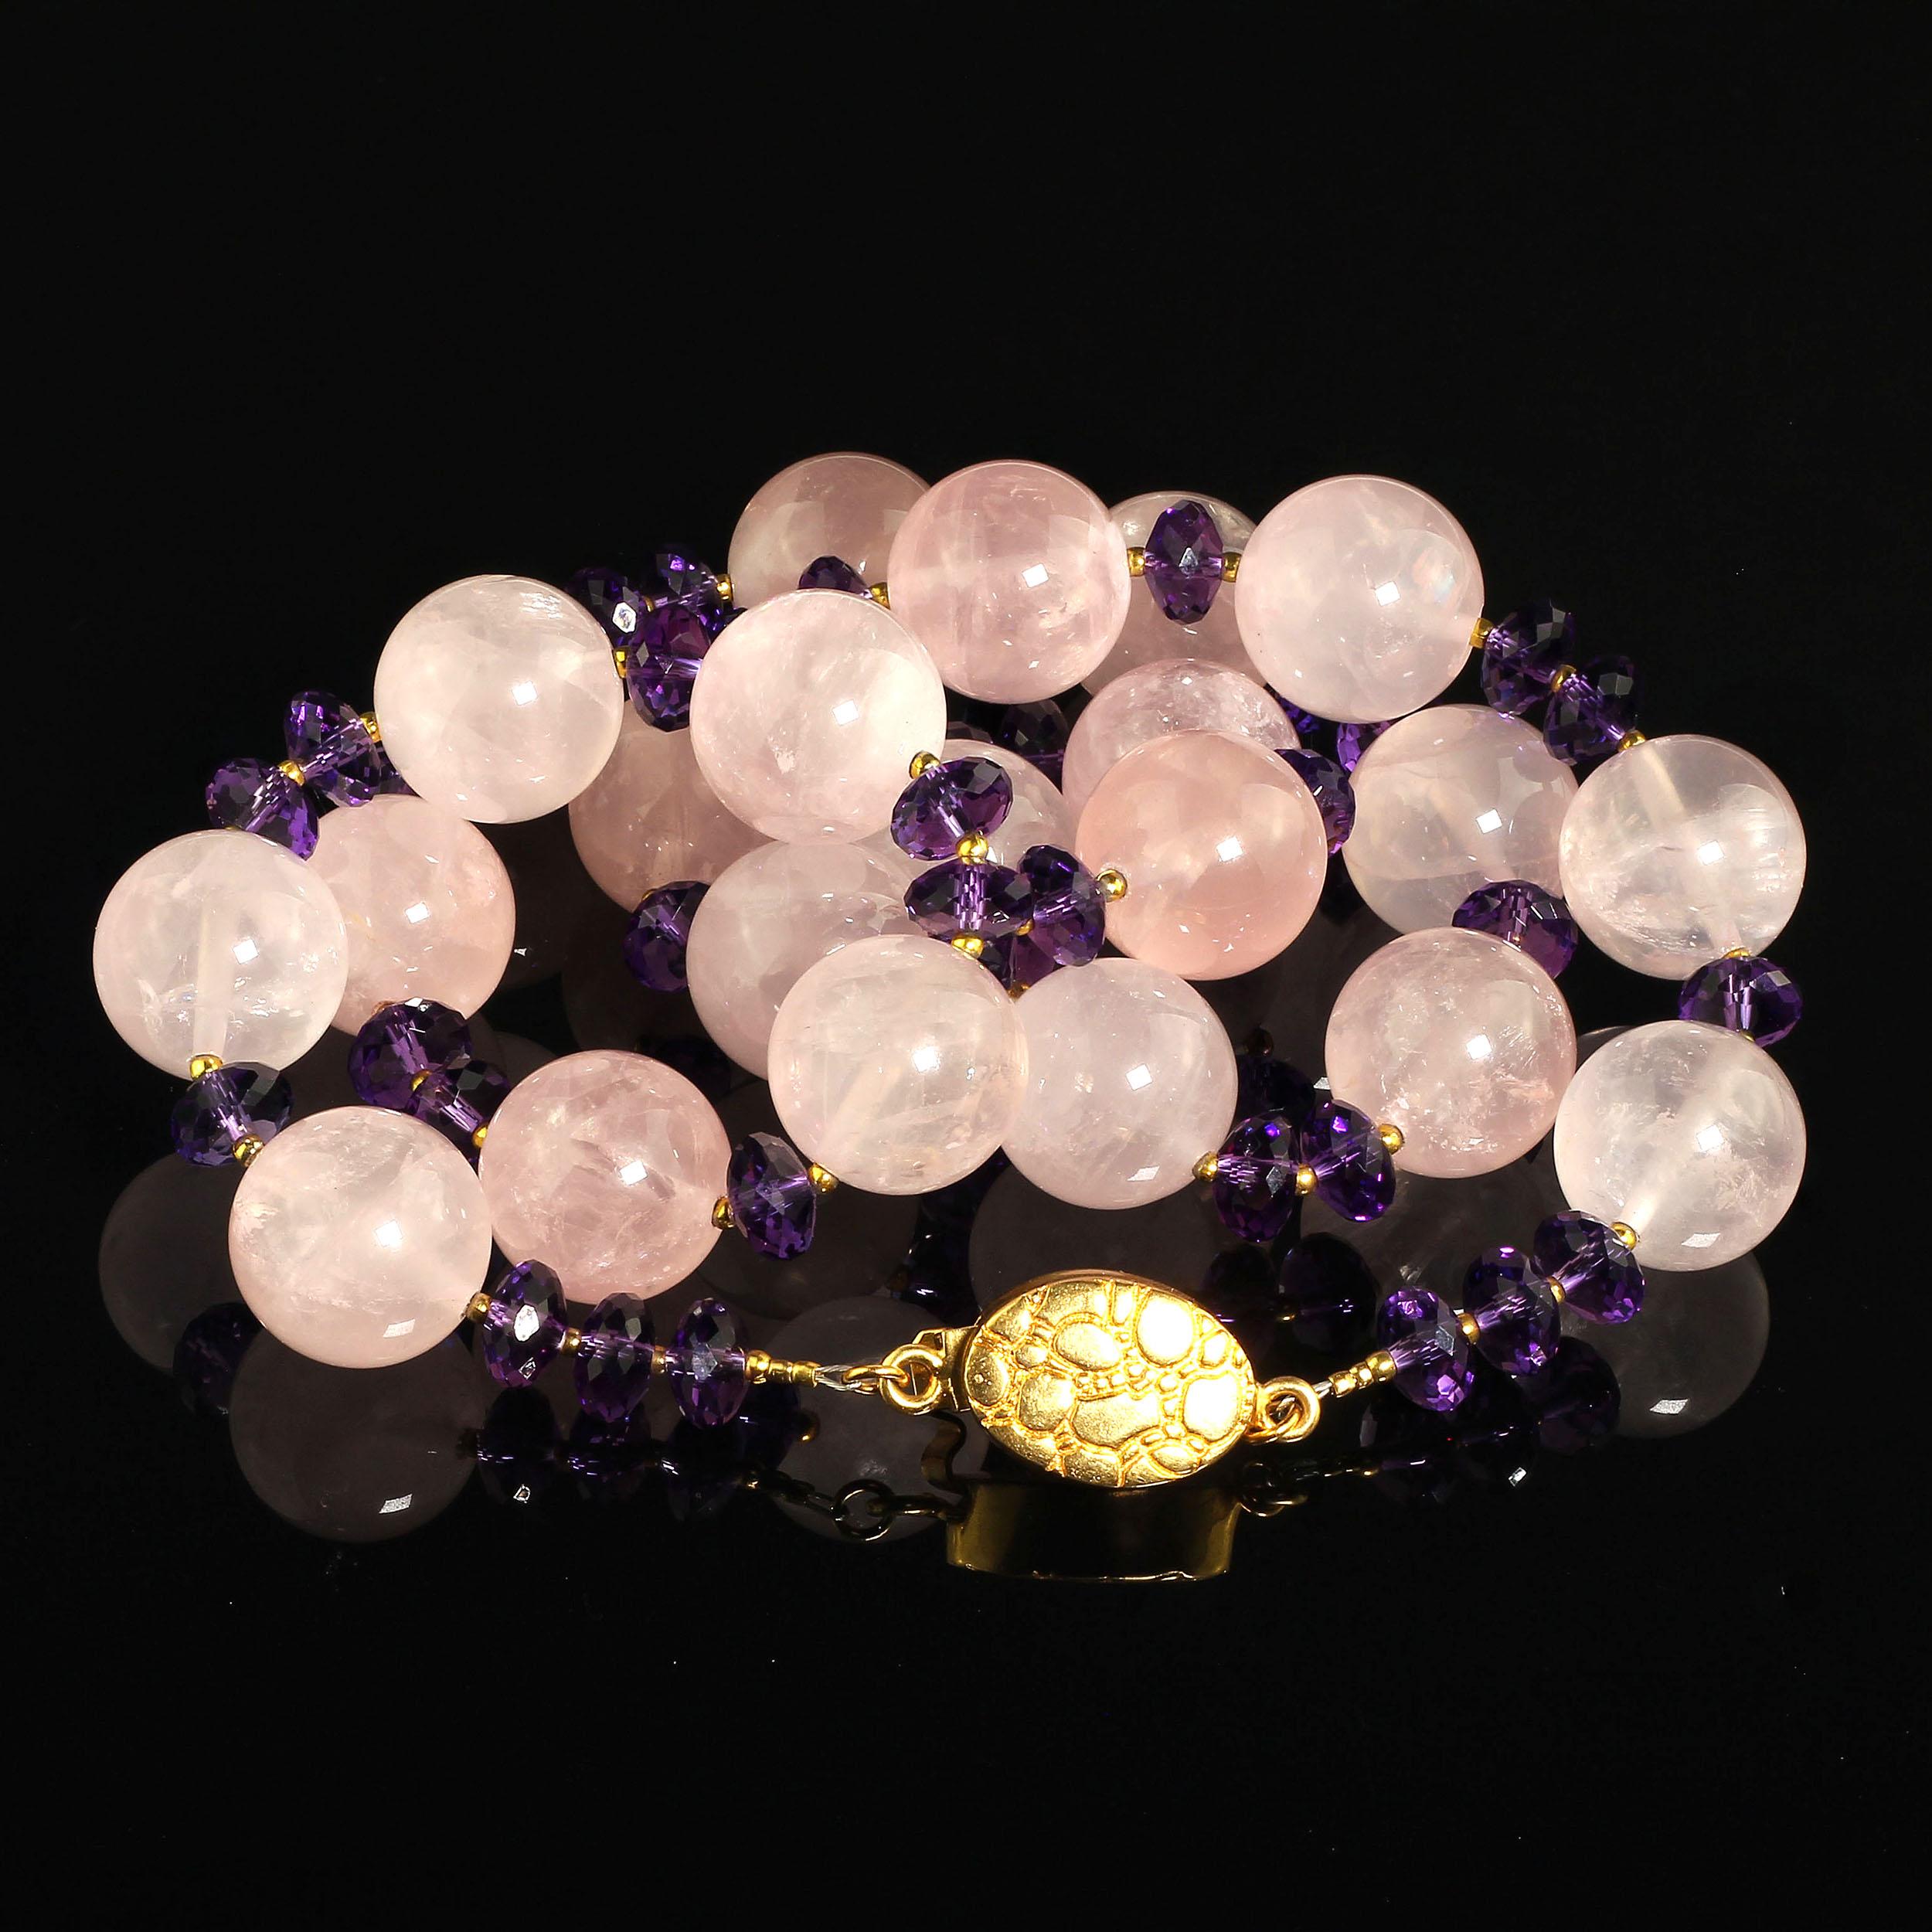 Sparkling Amethyst rondelles and glowing translucent Rose Quartz make this necklace a stunning addition to any wardrobe. The 25 inch length is very versatile and the gold tone accents and pebbled box clasp enhance the combination of Rose Quartz and